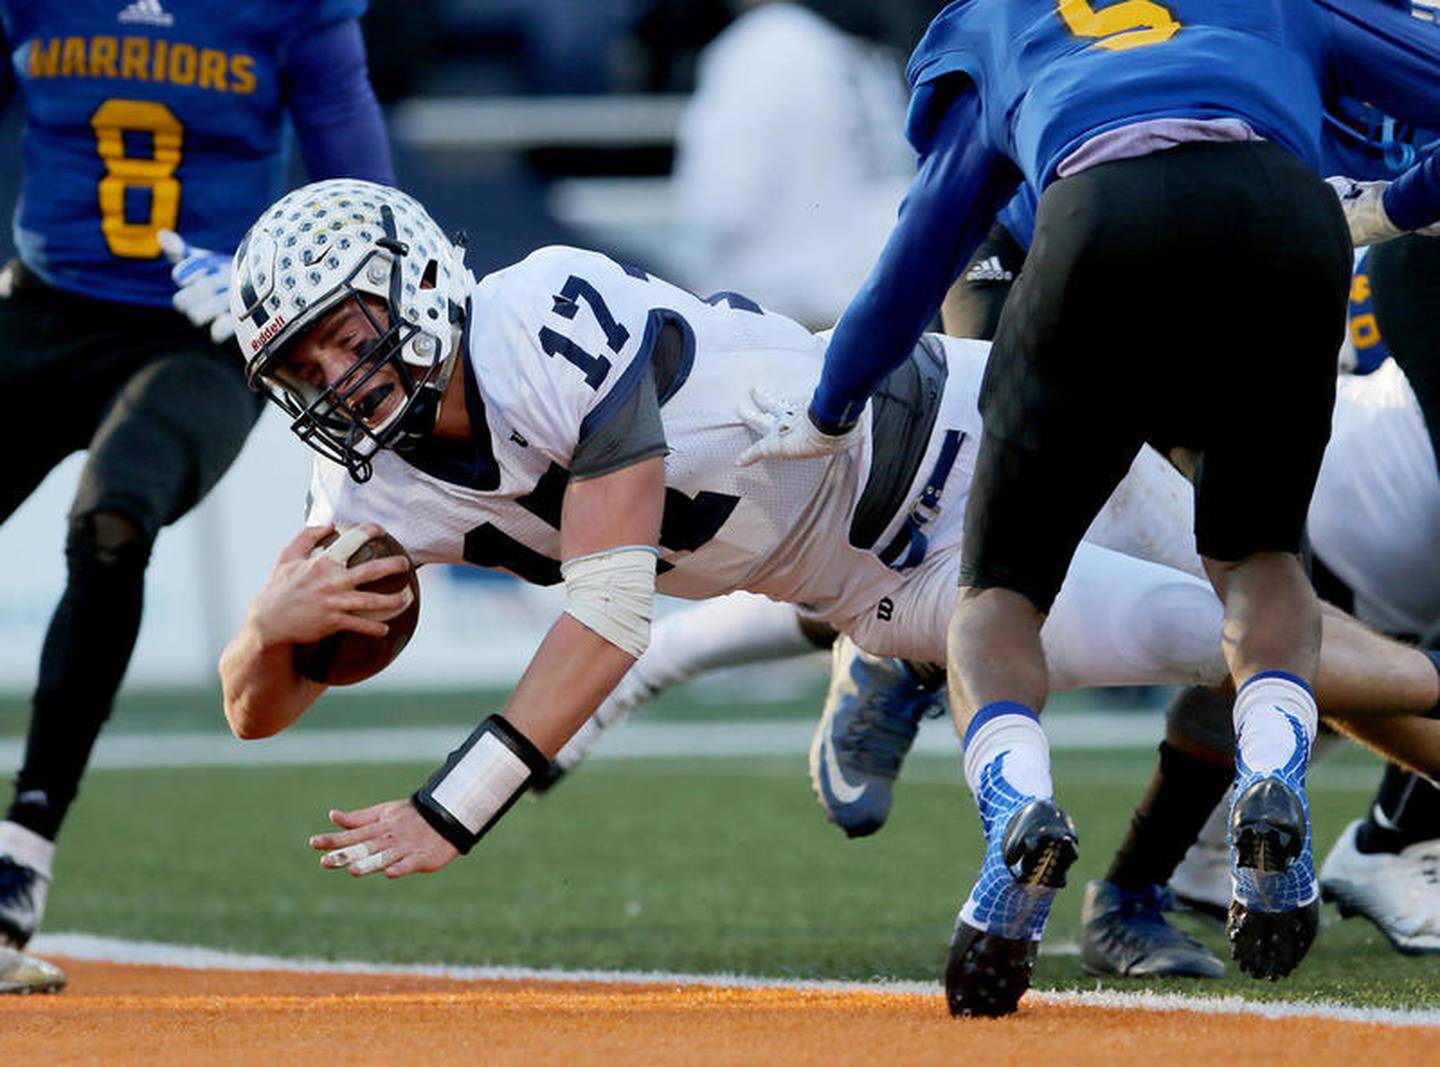 Cary-Grove quarterback Ben McDonald dives in to the endzone for the final Trojan touchdown against Crete-Monee during their IHSA Class 6A state final at Memorial Stadium at the University of Illinois on Saturday, Nov. 24, 2018 in Champaign. Cary-Grove finished off their undefeated season 14-0 with the 35-13 win over Crete-Monee to become 2018 state champions.